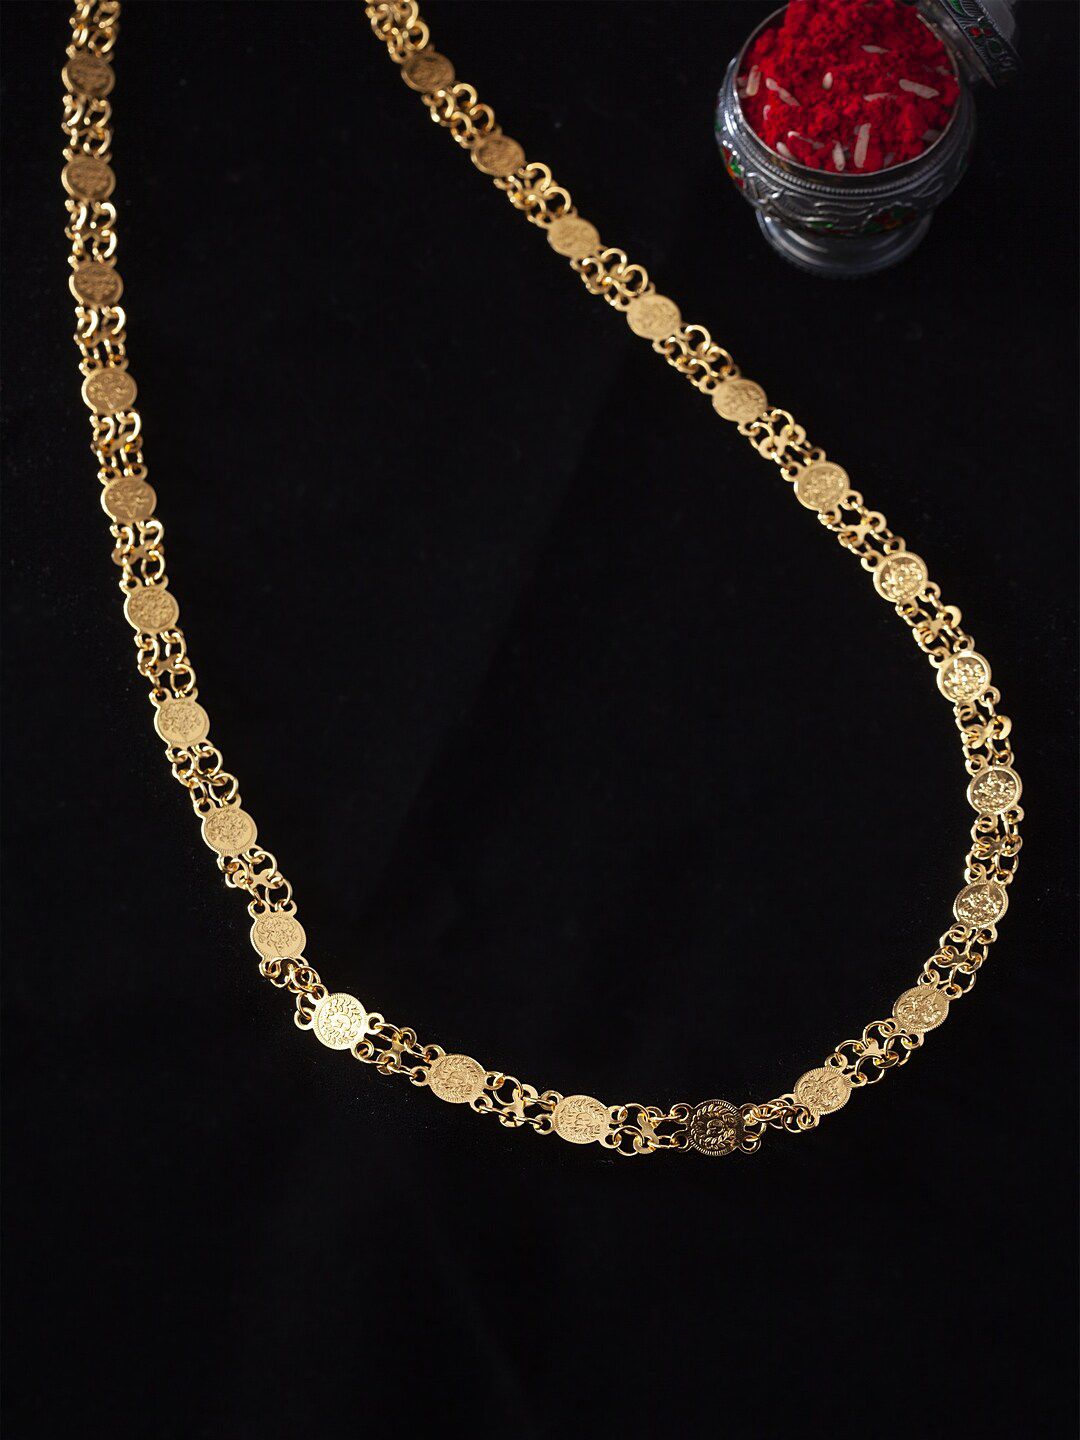 PANASH Gold-Plated Handcrafted Lakshmi Haar Necklace Price in India